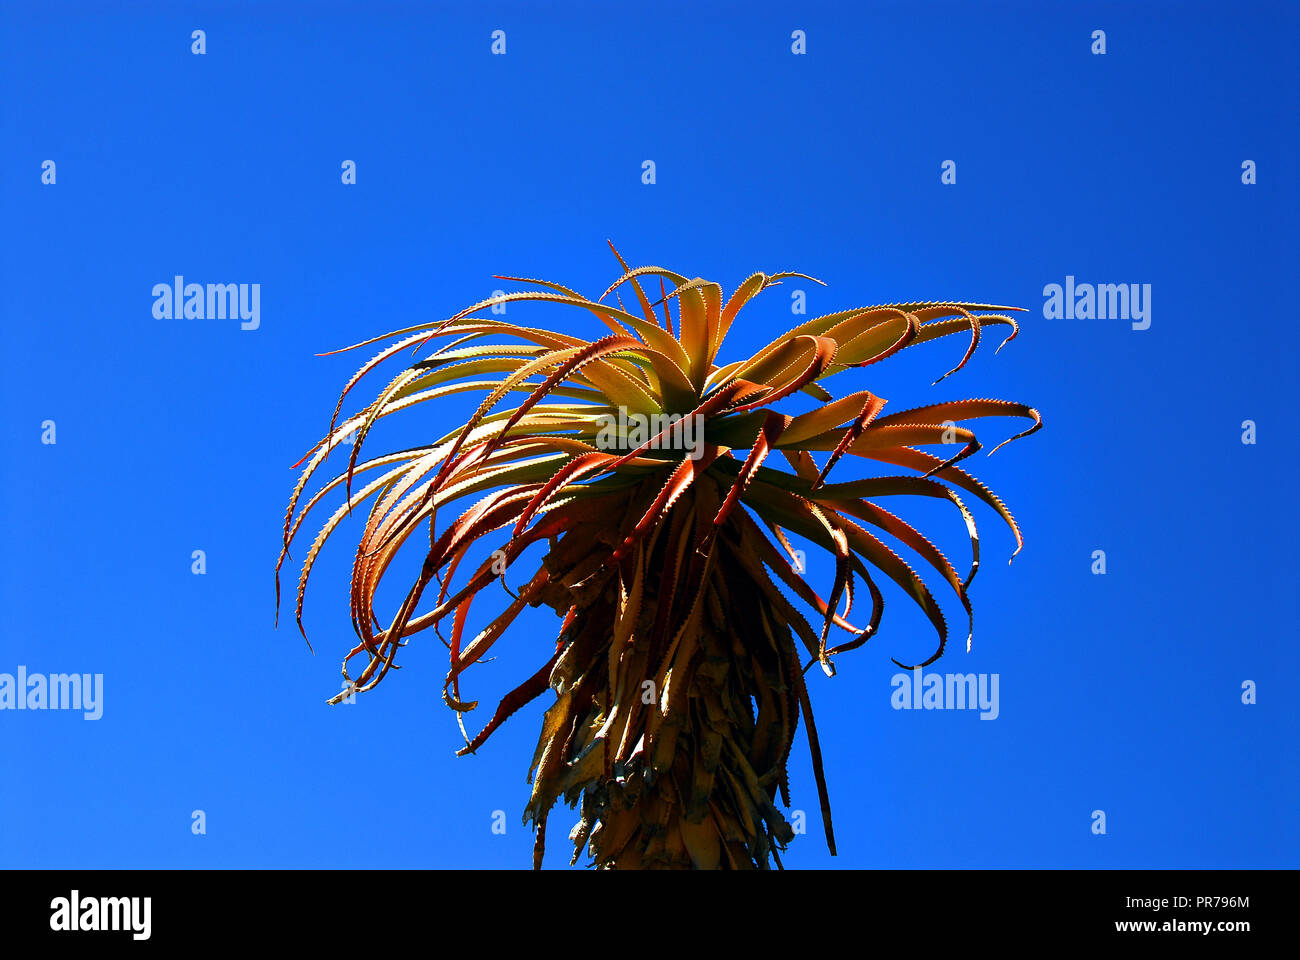 A beautiful red Aloe plant standing 20 feet tall, framed against a clear blue sky near Cape Town, South Africa.  Note the ample space for text. Stock Photo